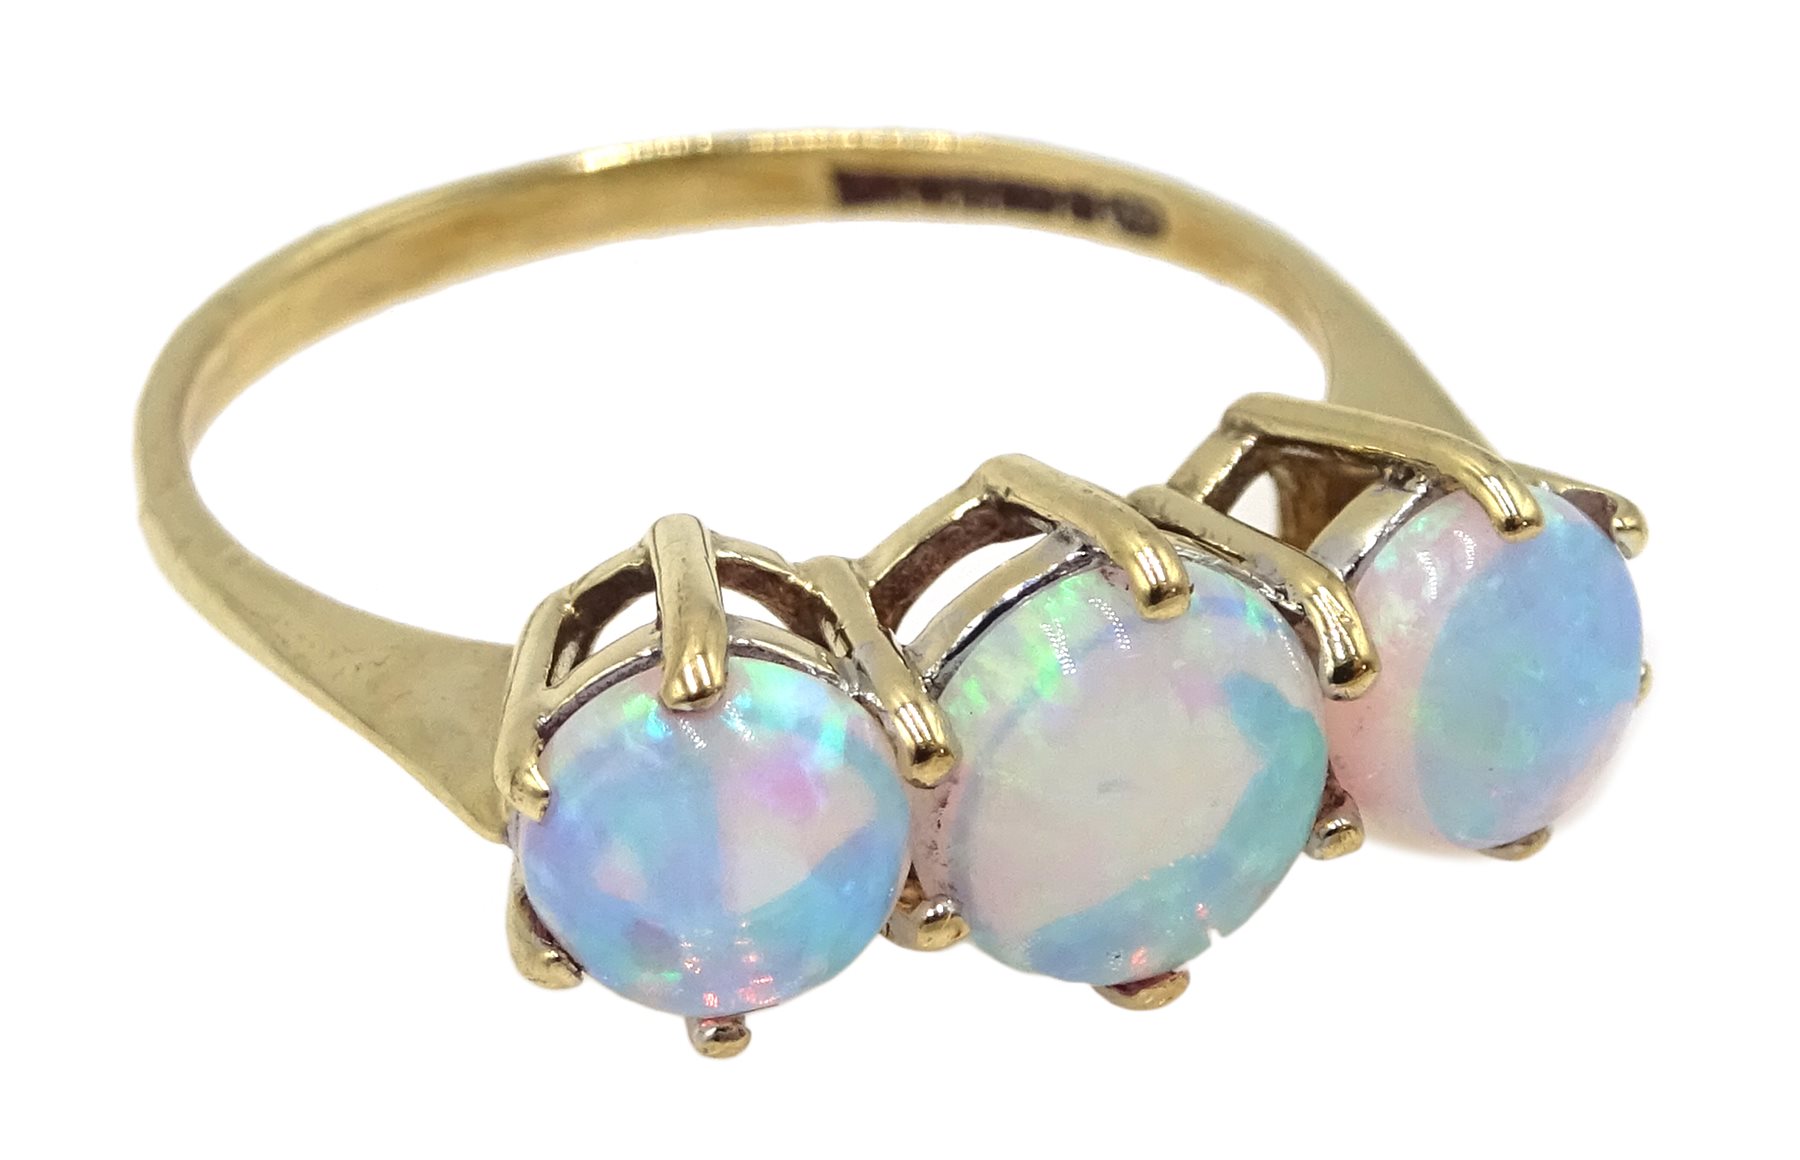 9ct gold three stone opal ring, hallmarked - Jewellery, Watches & Silver